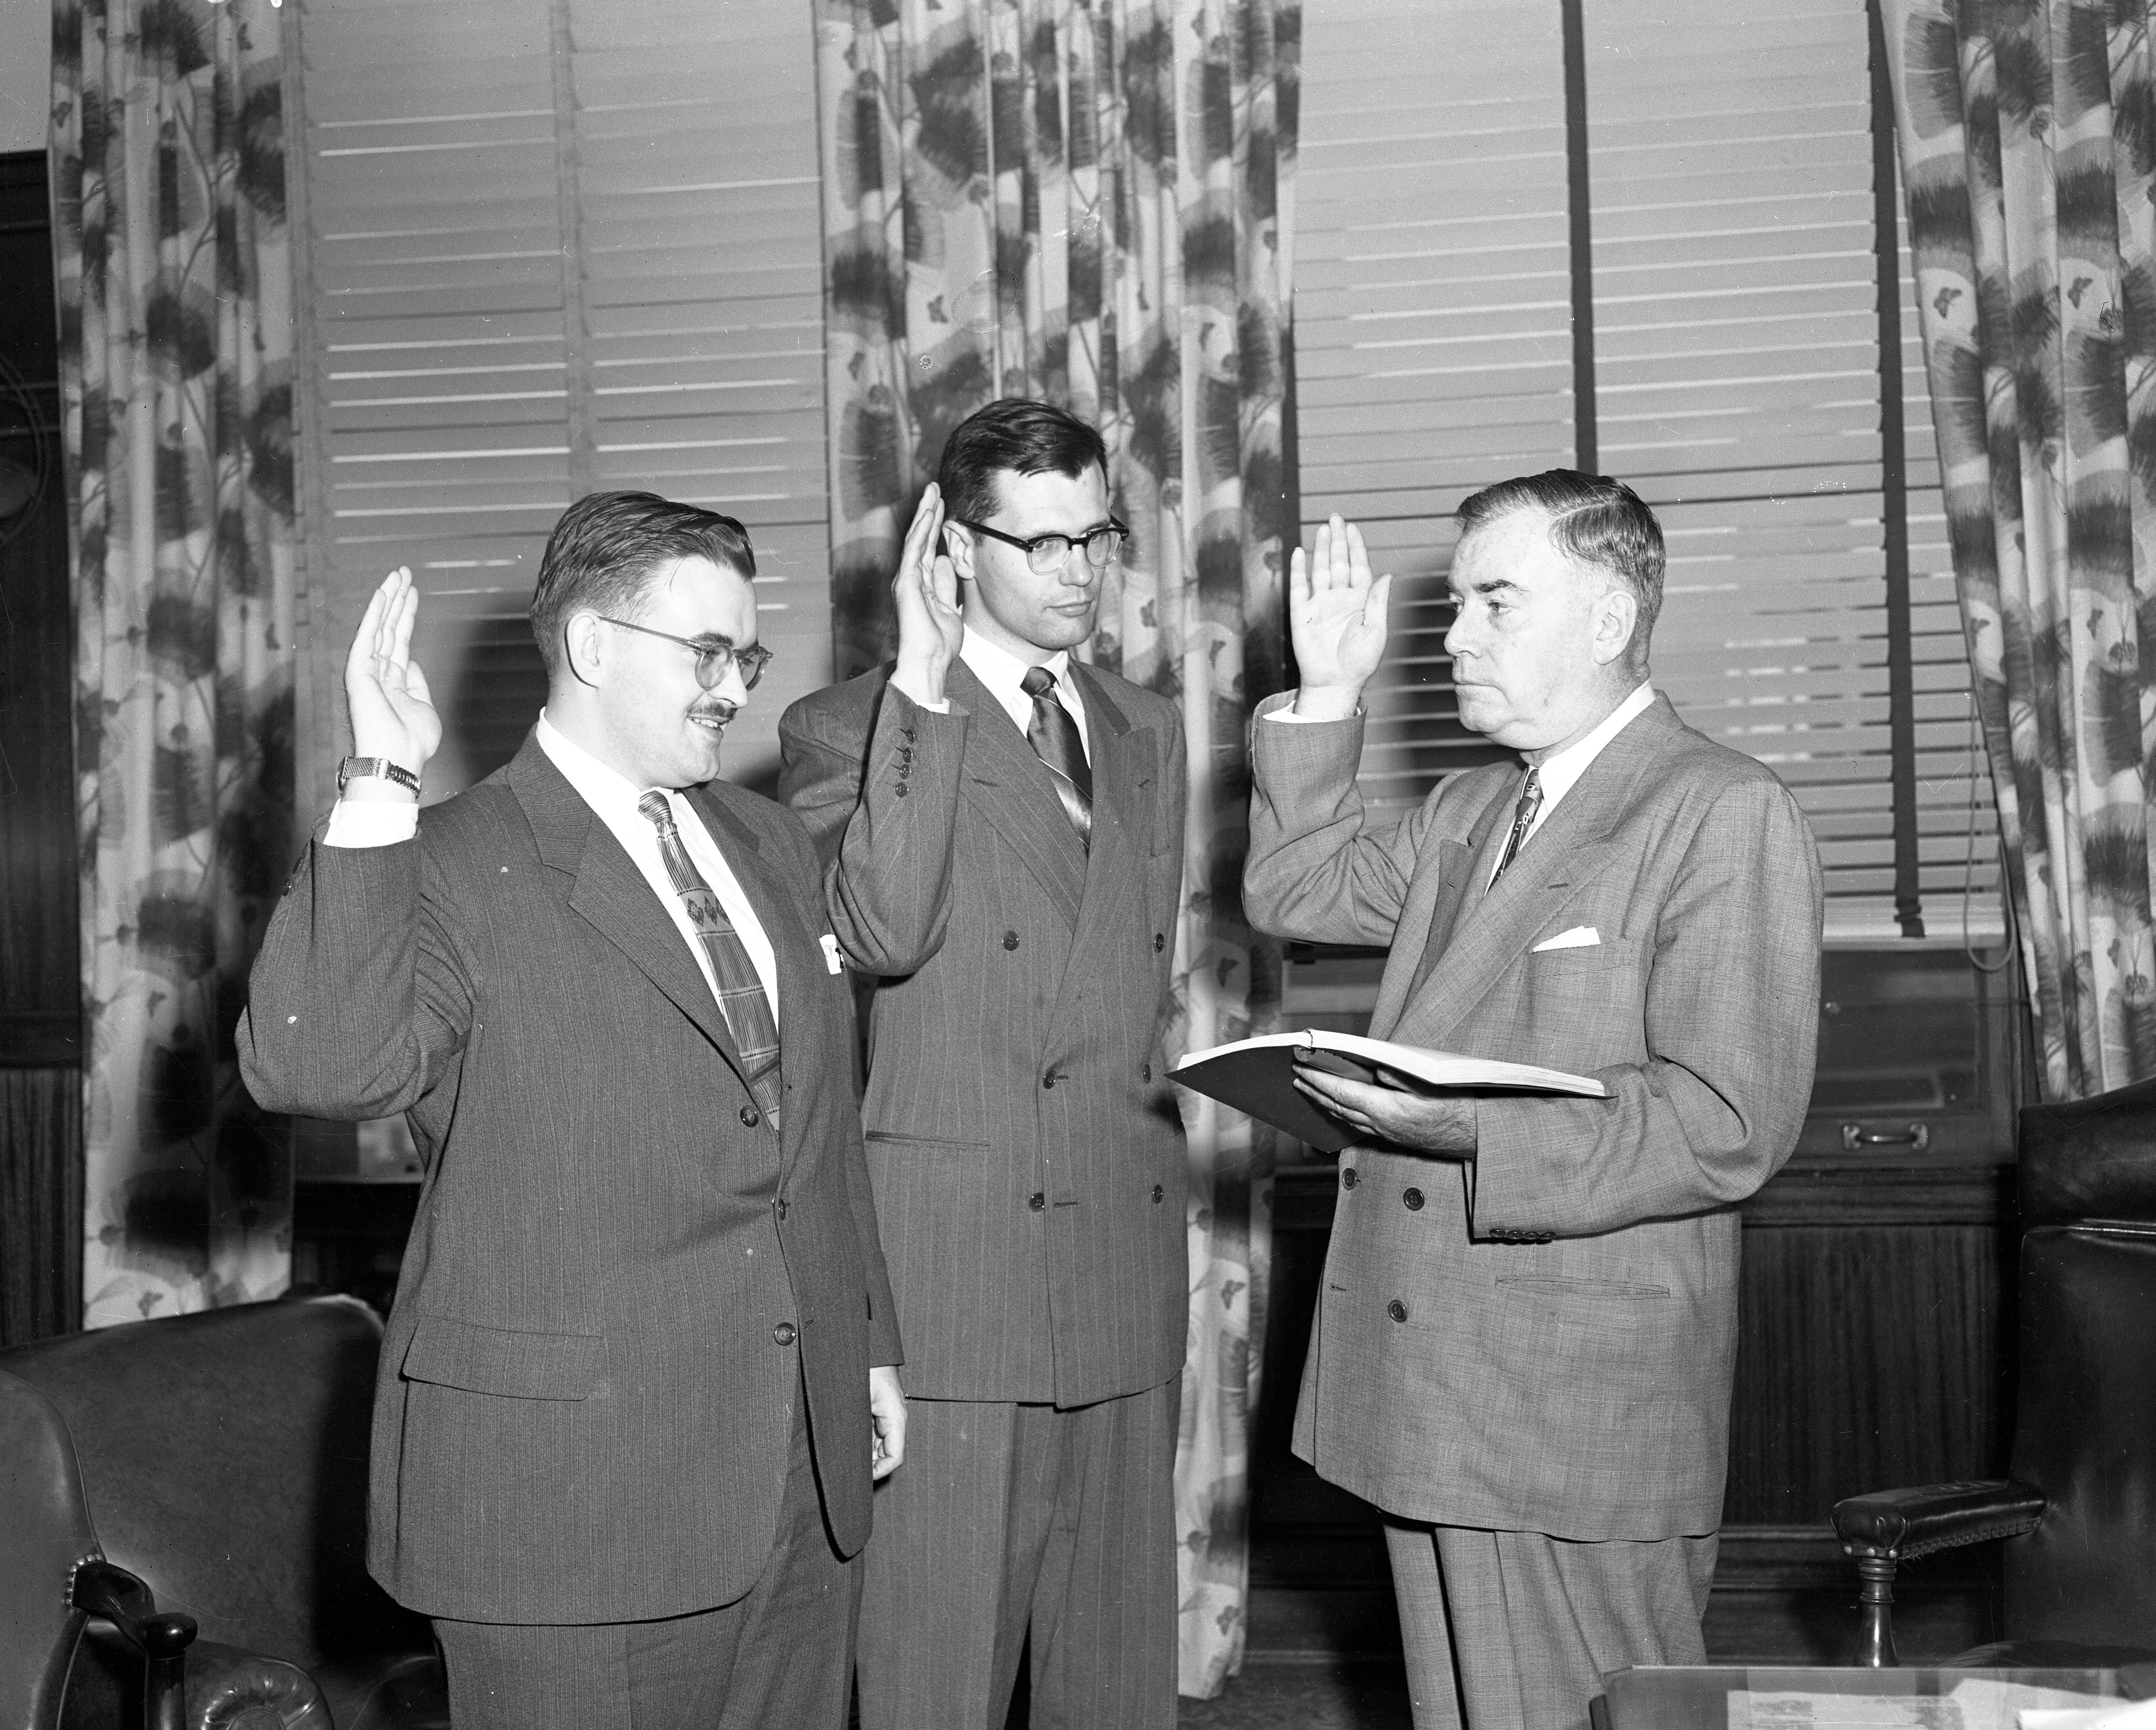 In 1953, John Dingell Jr., center, and William J. Coughlin, left, take the oath of office from Gerald O'Brien. Dingell would serve as an assistant prosecuting attorney for Wayne County until 1955.